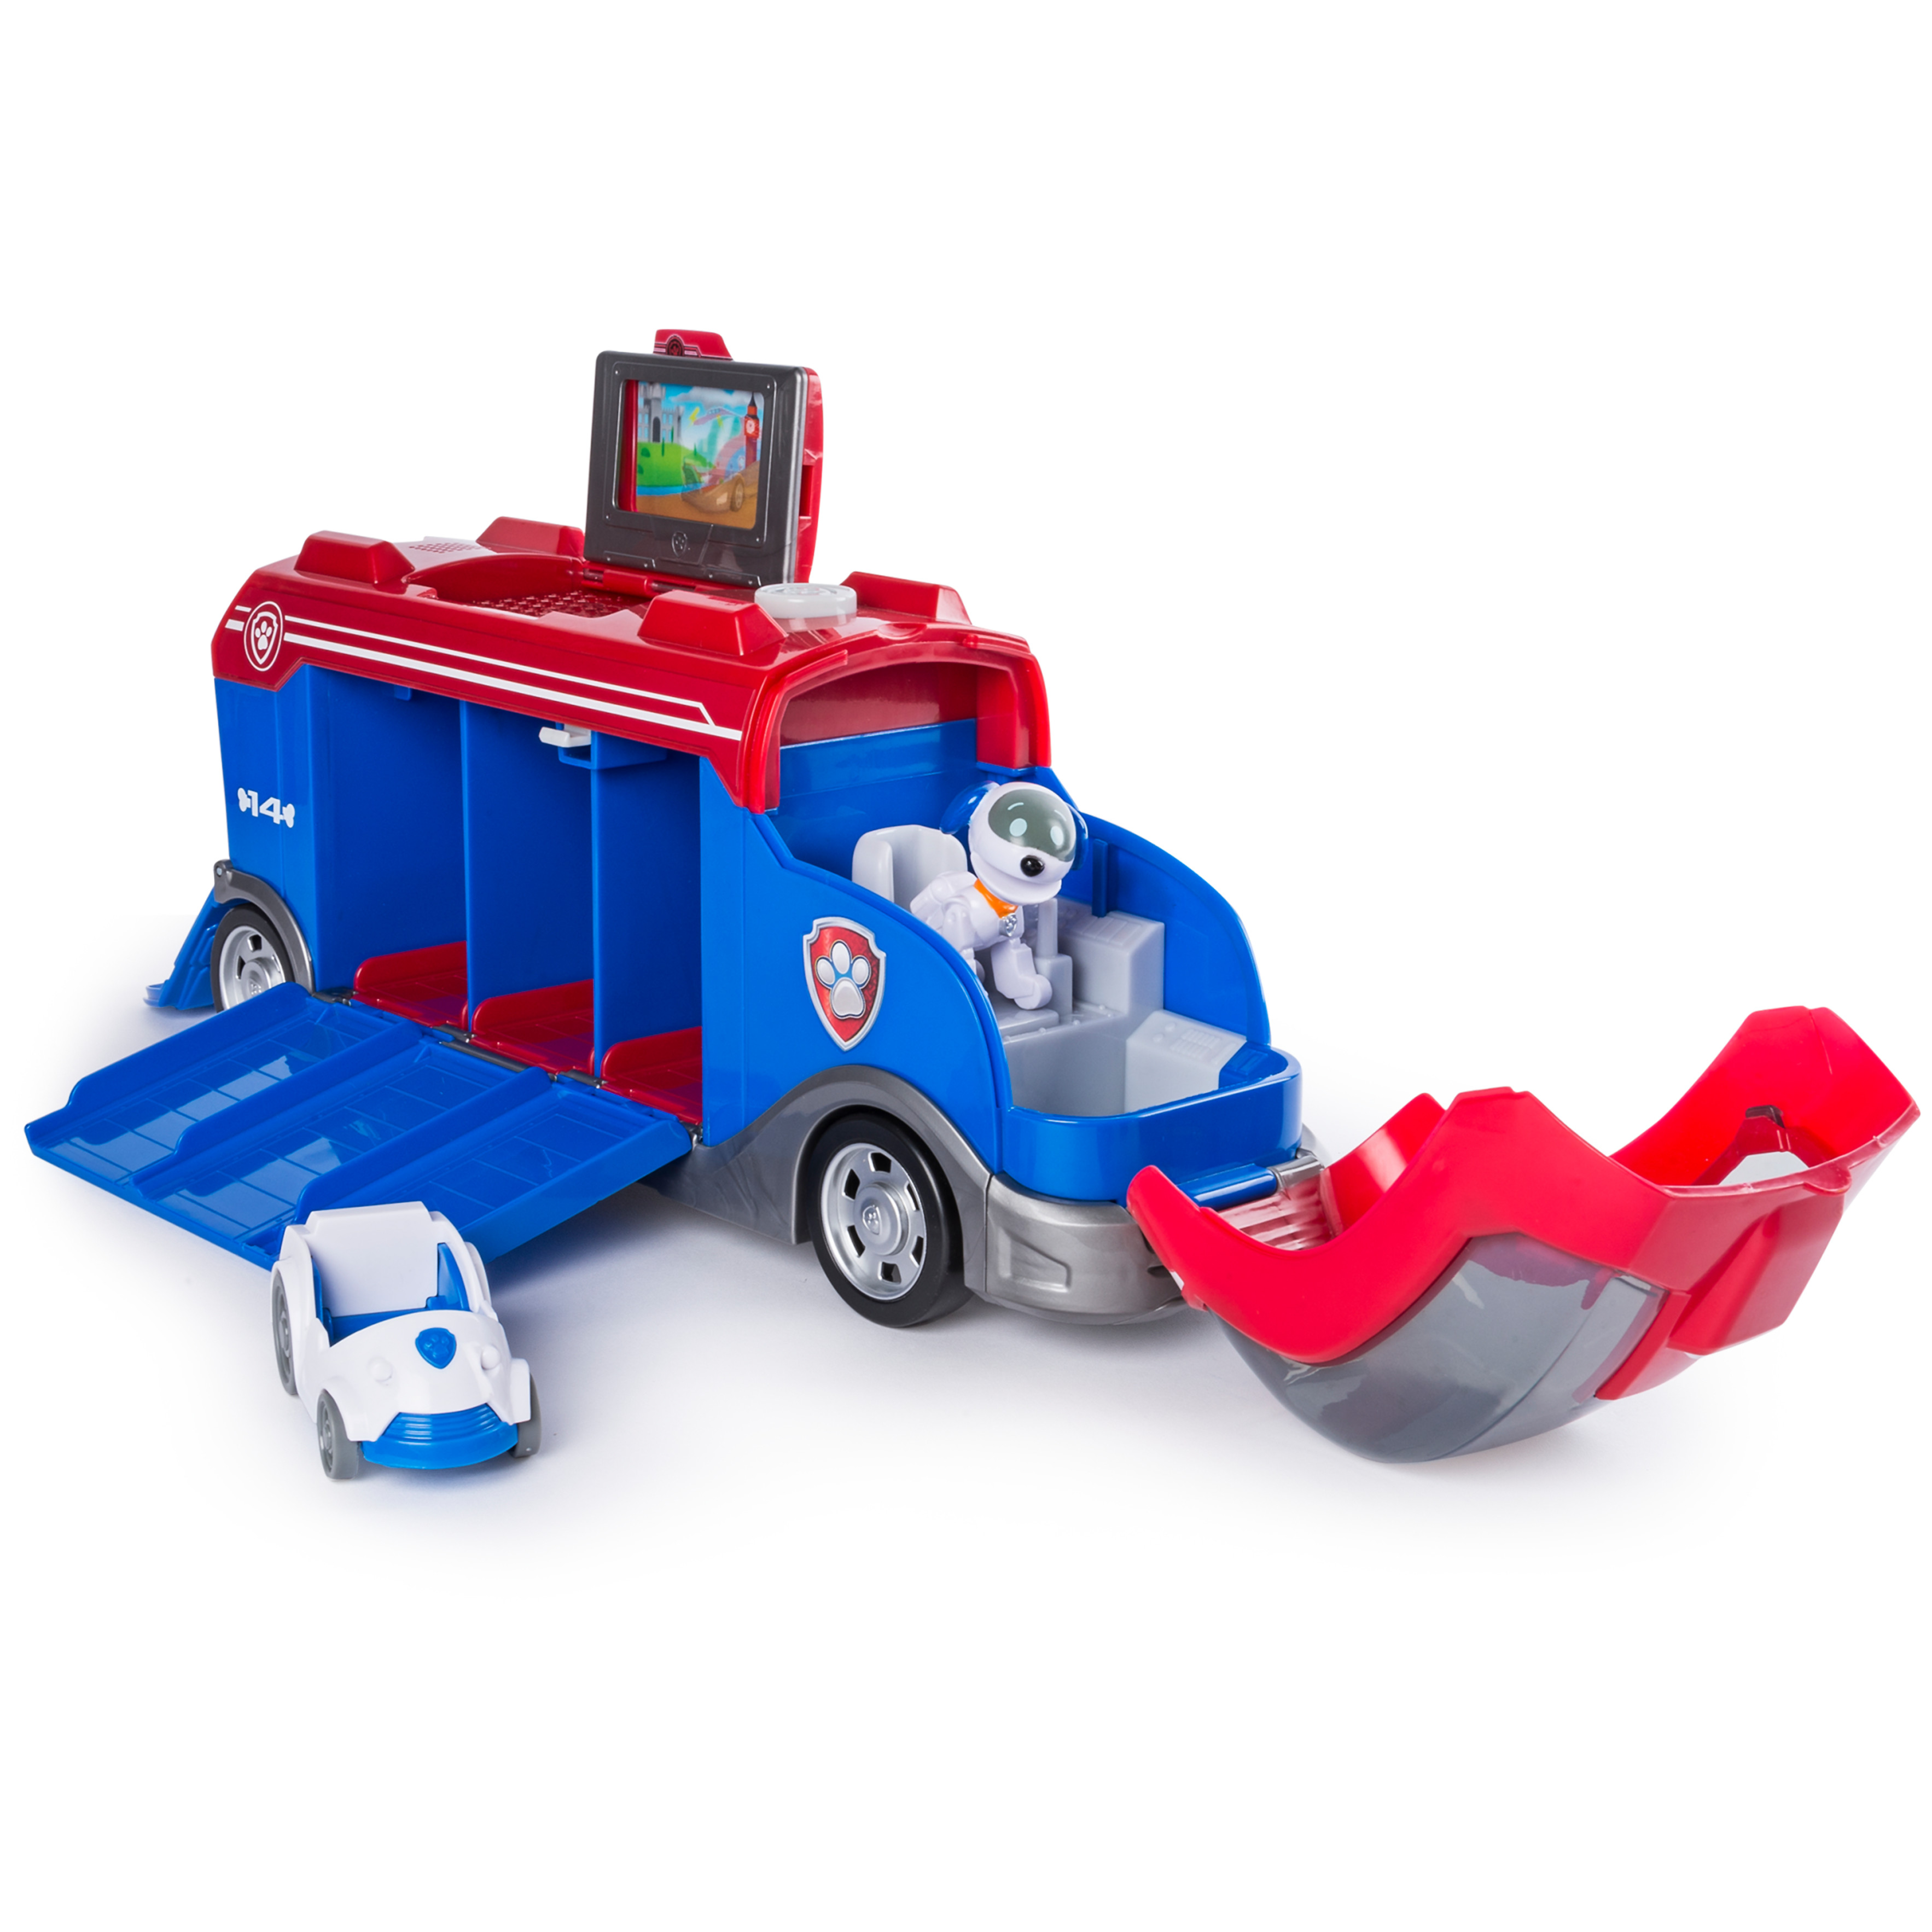 Paw Patrol Mission Paw - Mission Cruiser - Robo Dog and Vehicle - image 3 of 8